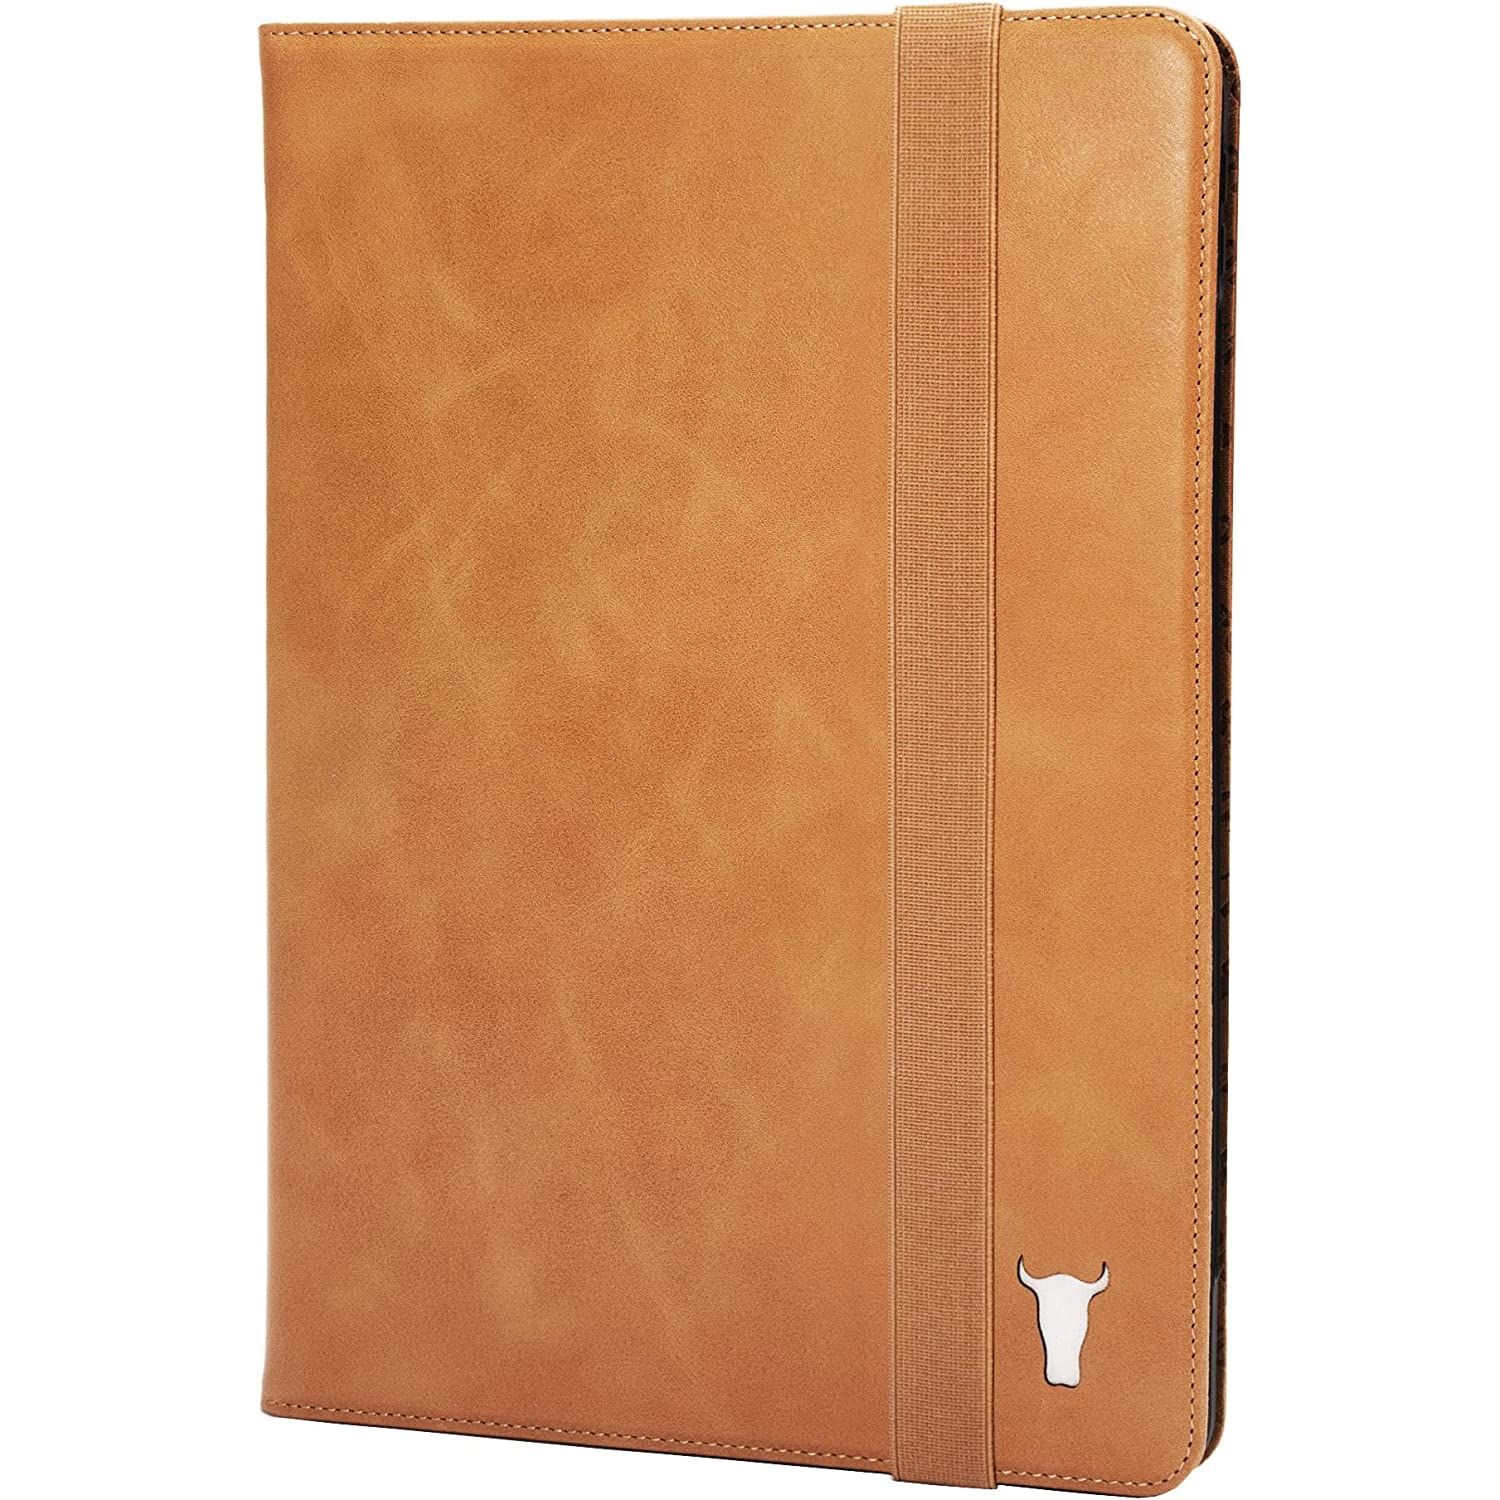 Render of the TORRO Leather Case for 11-inch iPad Pro